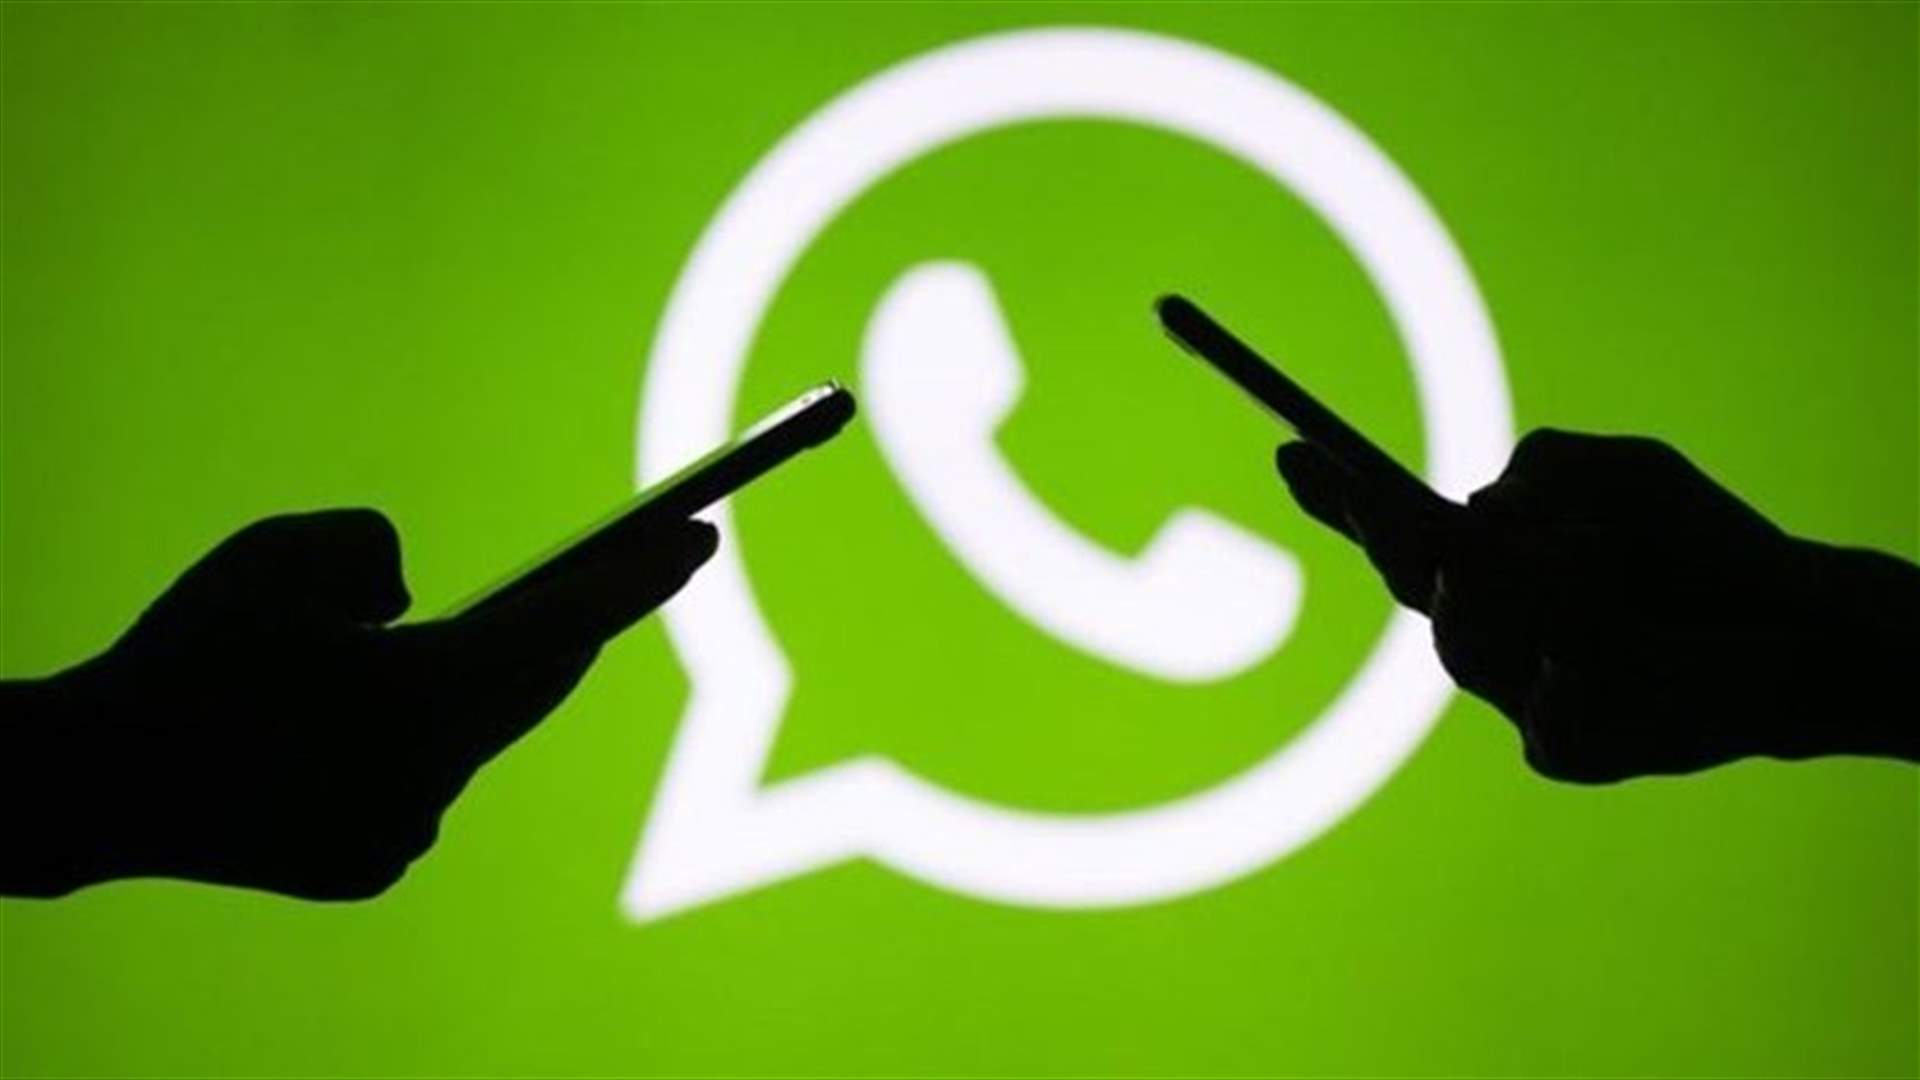 Does Cabinet WhatsApp decision violate privacy and law&#63;